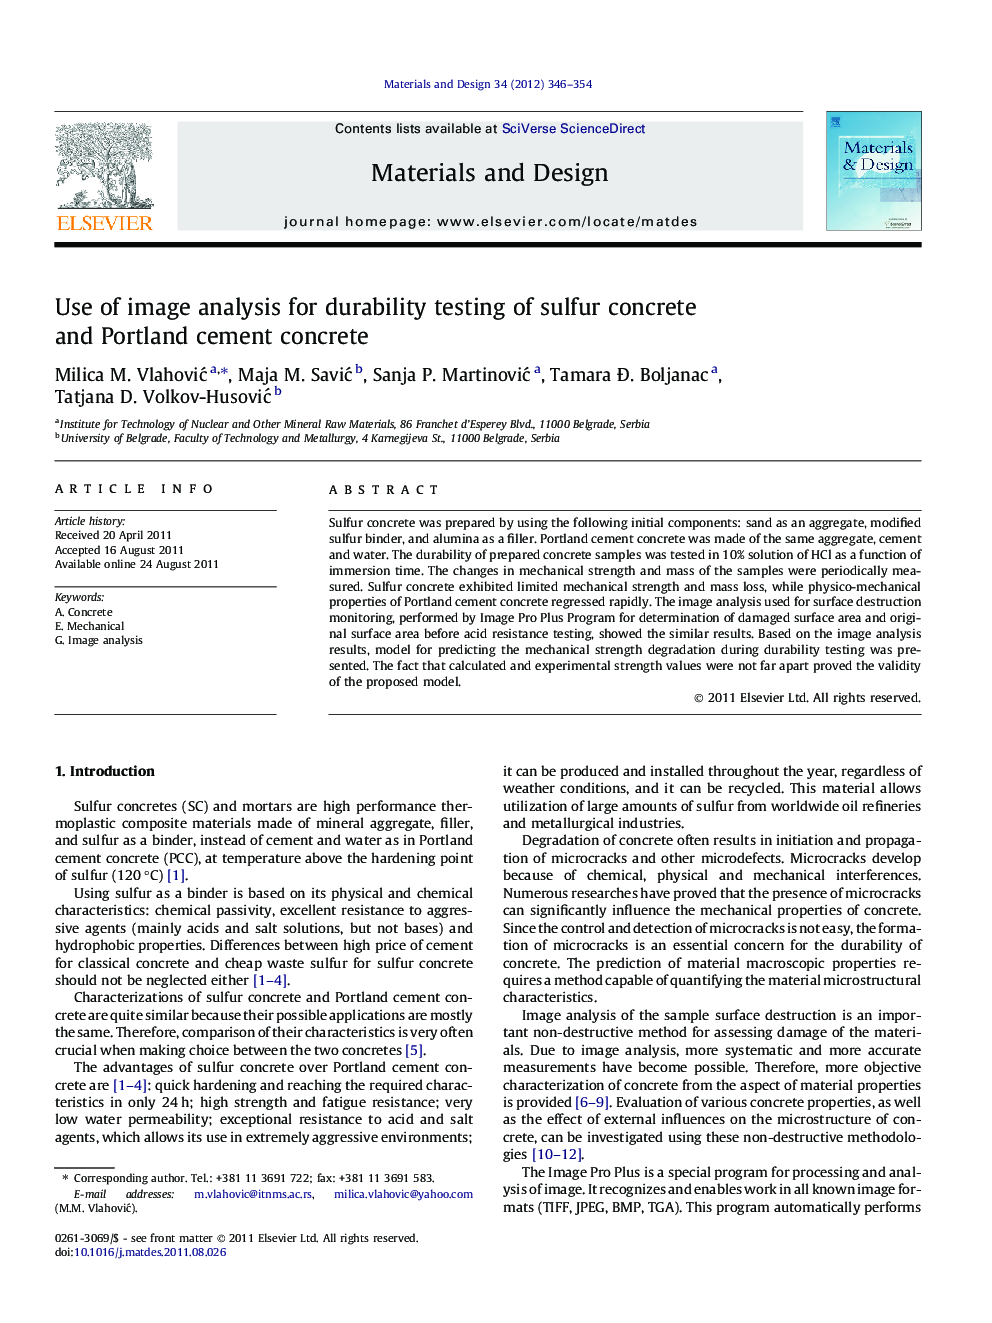 Use of image analysis for durability testing of sulfur concrete and Portland cement concrete